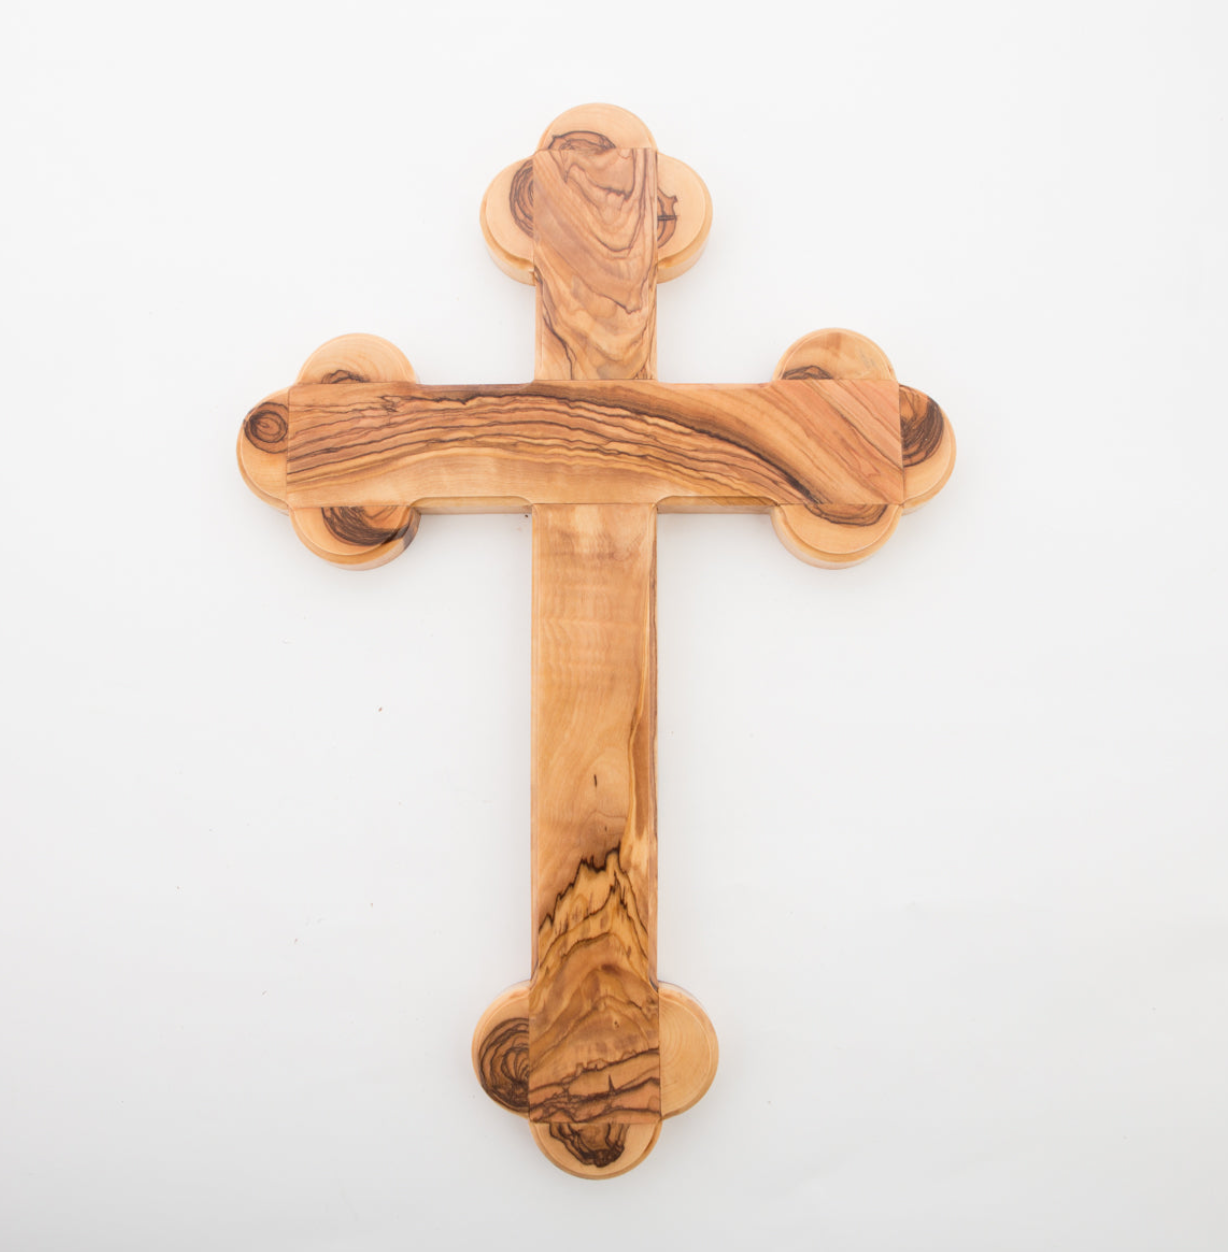 15 Handmade Wooden Cross Budded from Holy Land Olive Wood